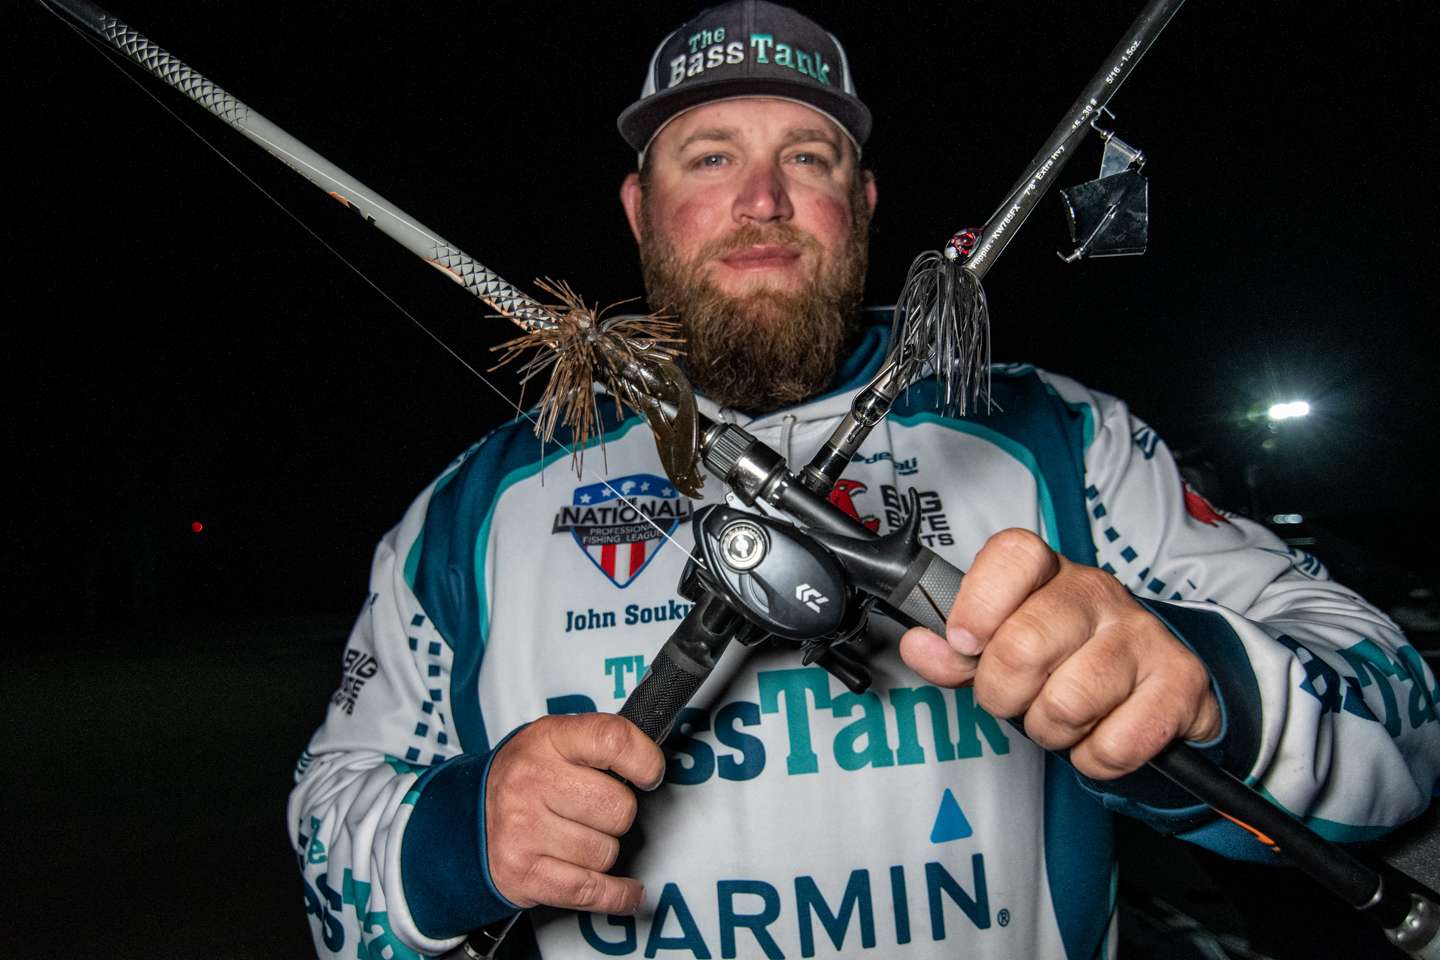 <b>John Soukup (4th, 42-15) </b><br> Soukup had the second-heaviest one-day bag of the tournament â 19-1 â on Day 1 and held the lead after Day 2 before finishing 4th. One of his primary lures was a 1/2-ounce Booyah Buzz buzzbait in solid black. He added a trailer hook to the buzzbait. âI donât usually like a trailer hook on it,â he said. âBut they were swirling and slapping at it a lot.â Soukup covered water around bluffs and bluff ends where current had concentrated baitfish. 